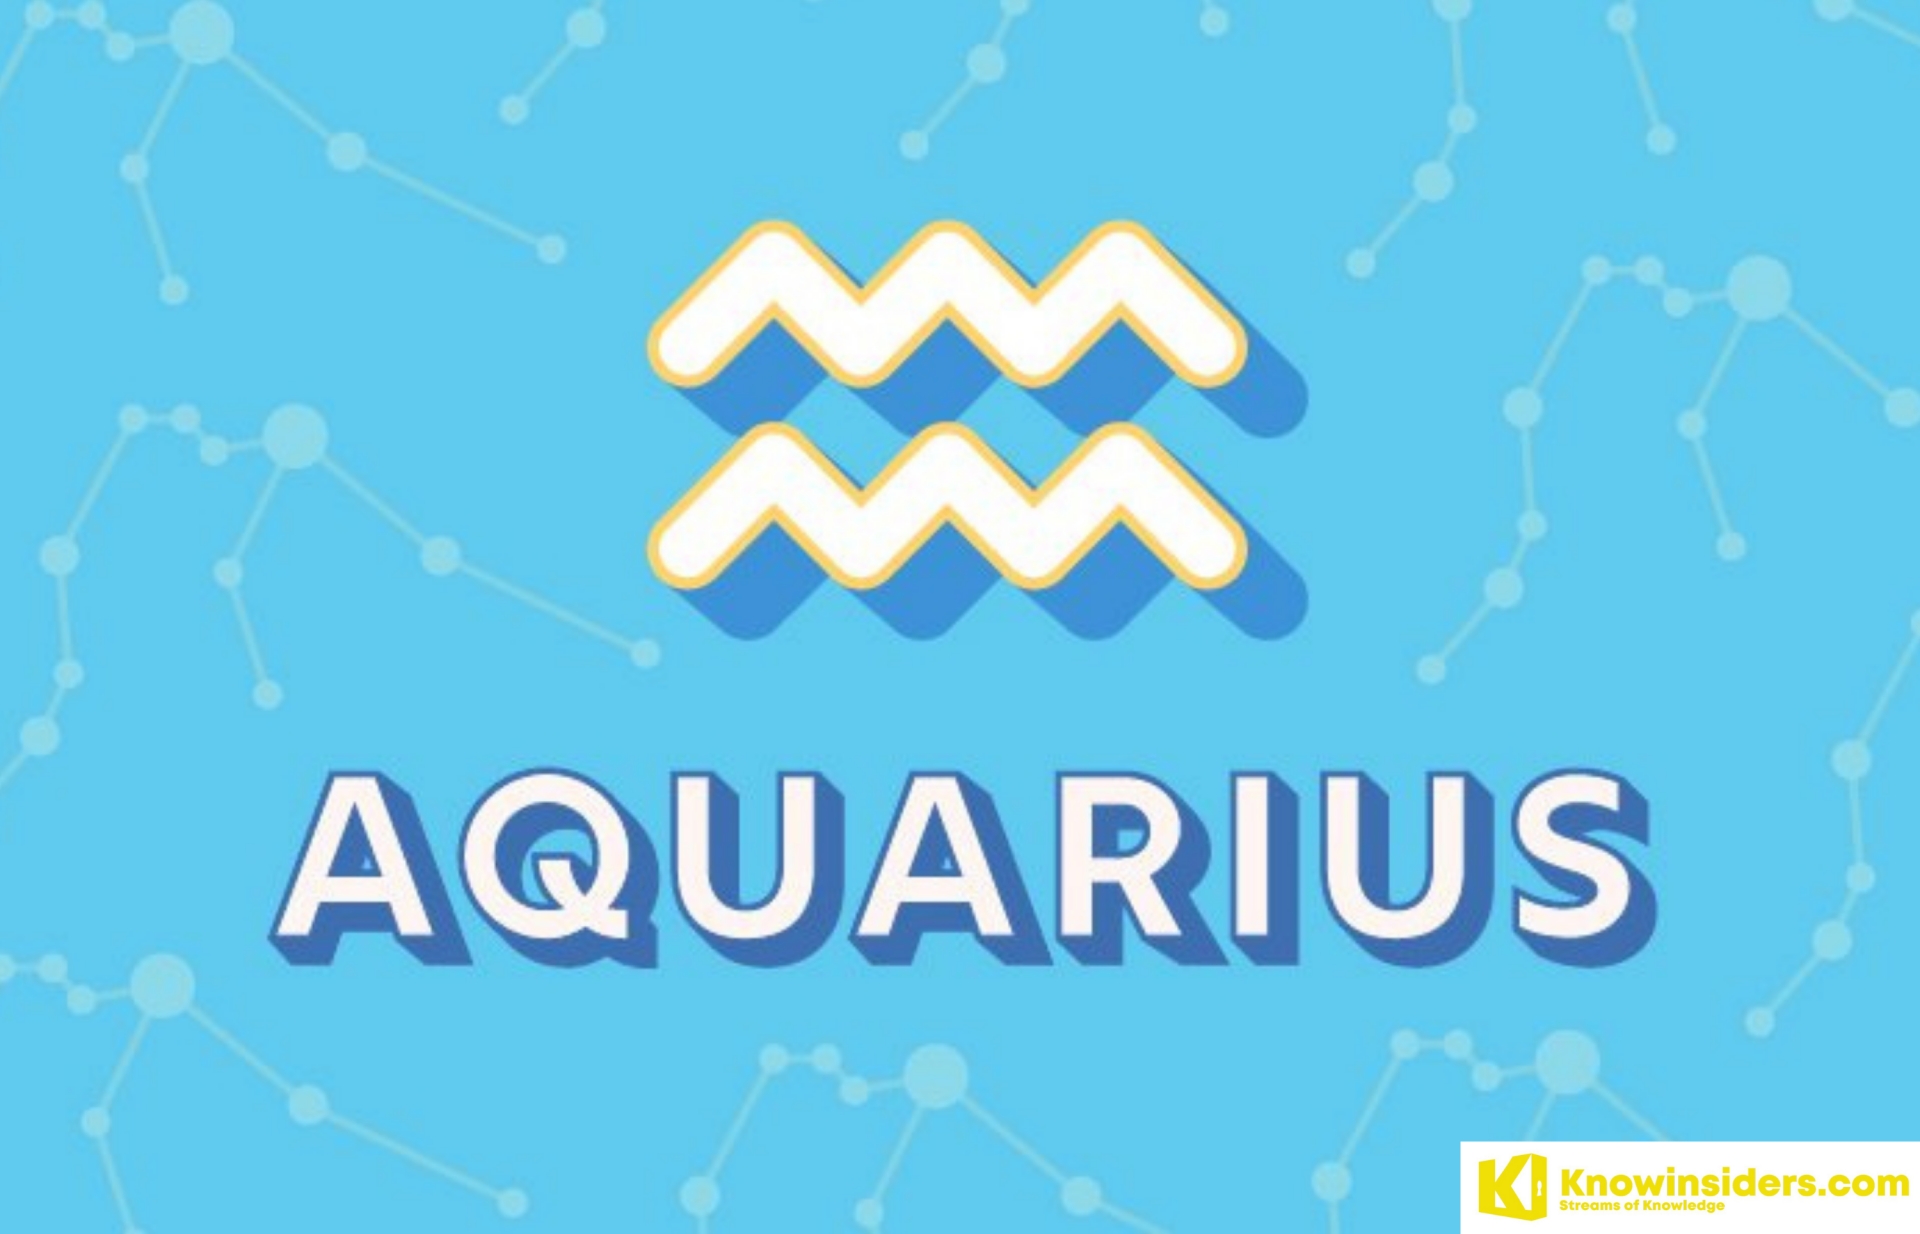 AQUARIUS Weekly Horoscope (April 12 - 18): Prediction for Love, Finance, Career and Health